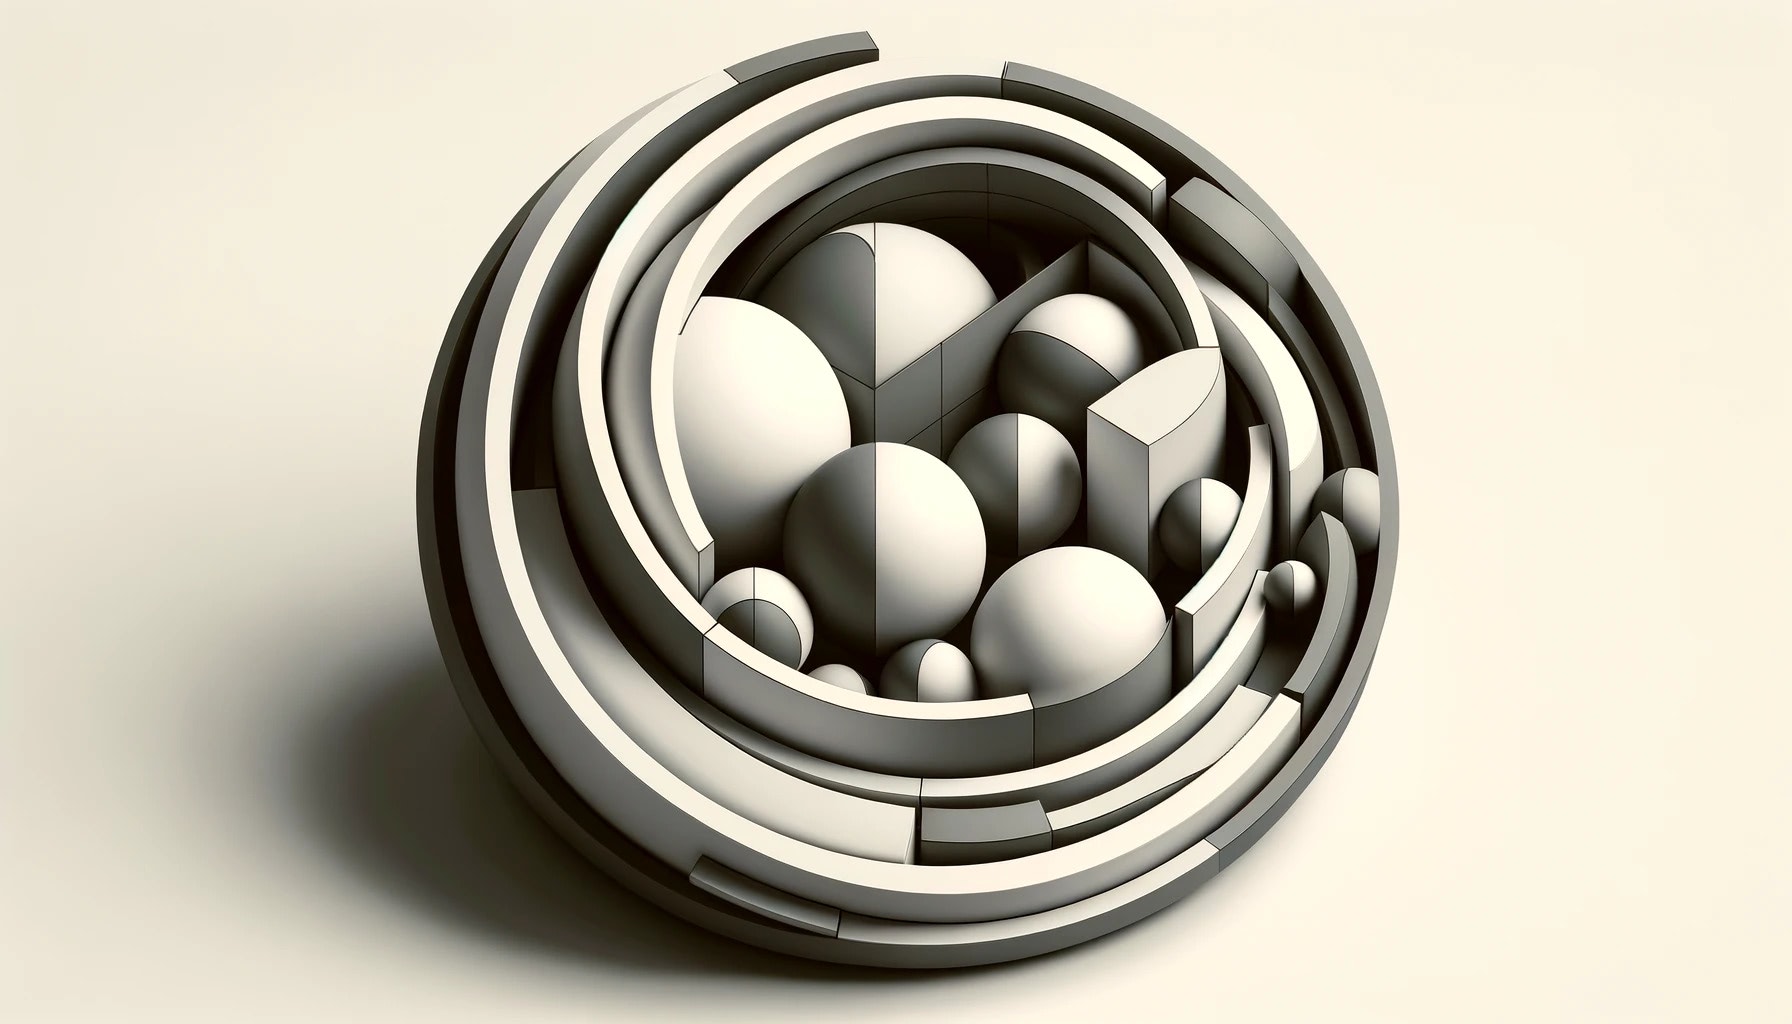 Abstract, 3D-like image in a duotone color scheme depicting the concept of nesting with interlocking geometric shapes or smooth curves, evoking a sense of order and harmony